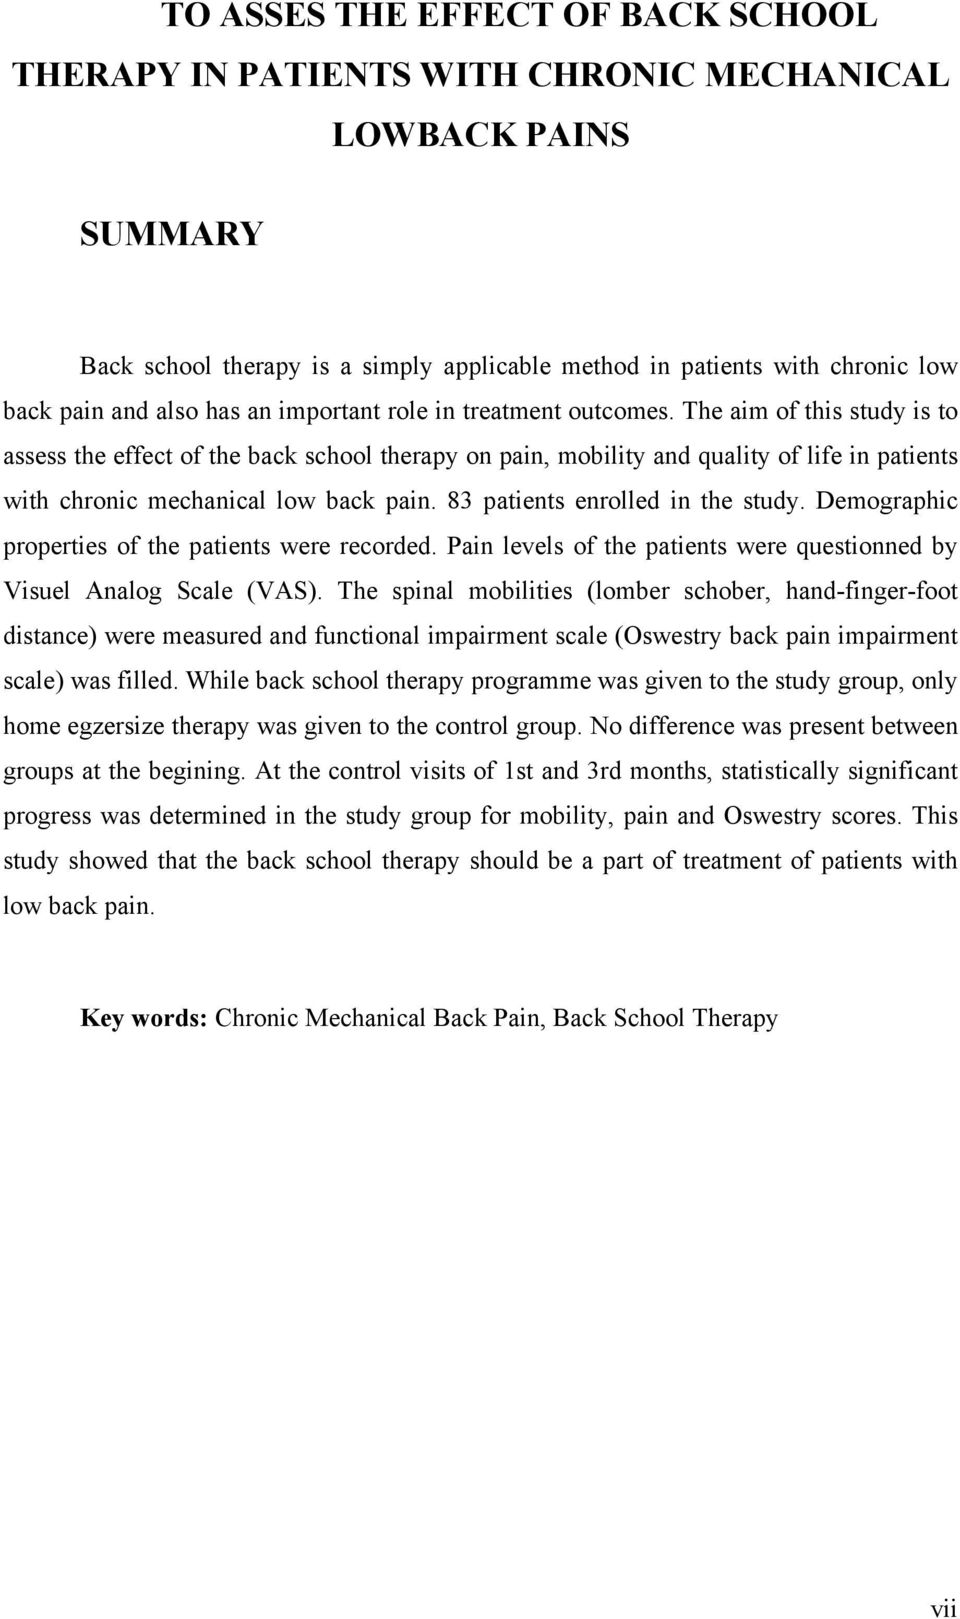 The aim of this study is to assess the effect of the back school therapy on pain, mobility and quality of life in patients with chronic mechanical low back pain. 83 patients enrolled in the study.